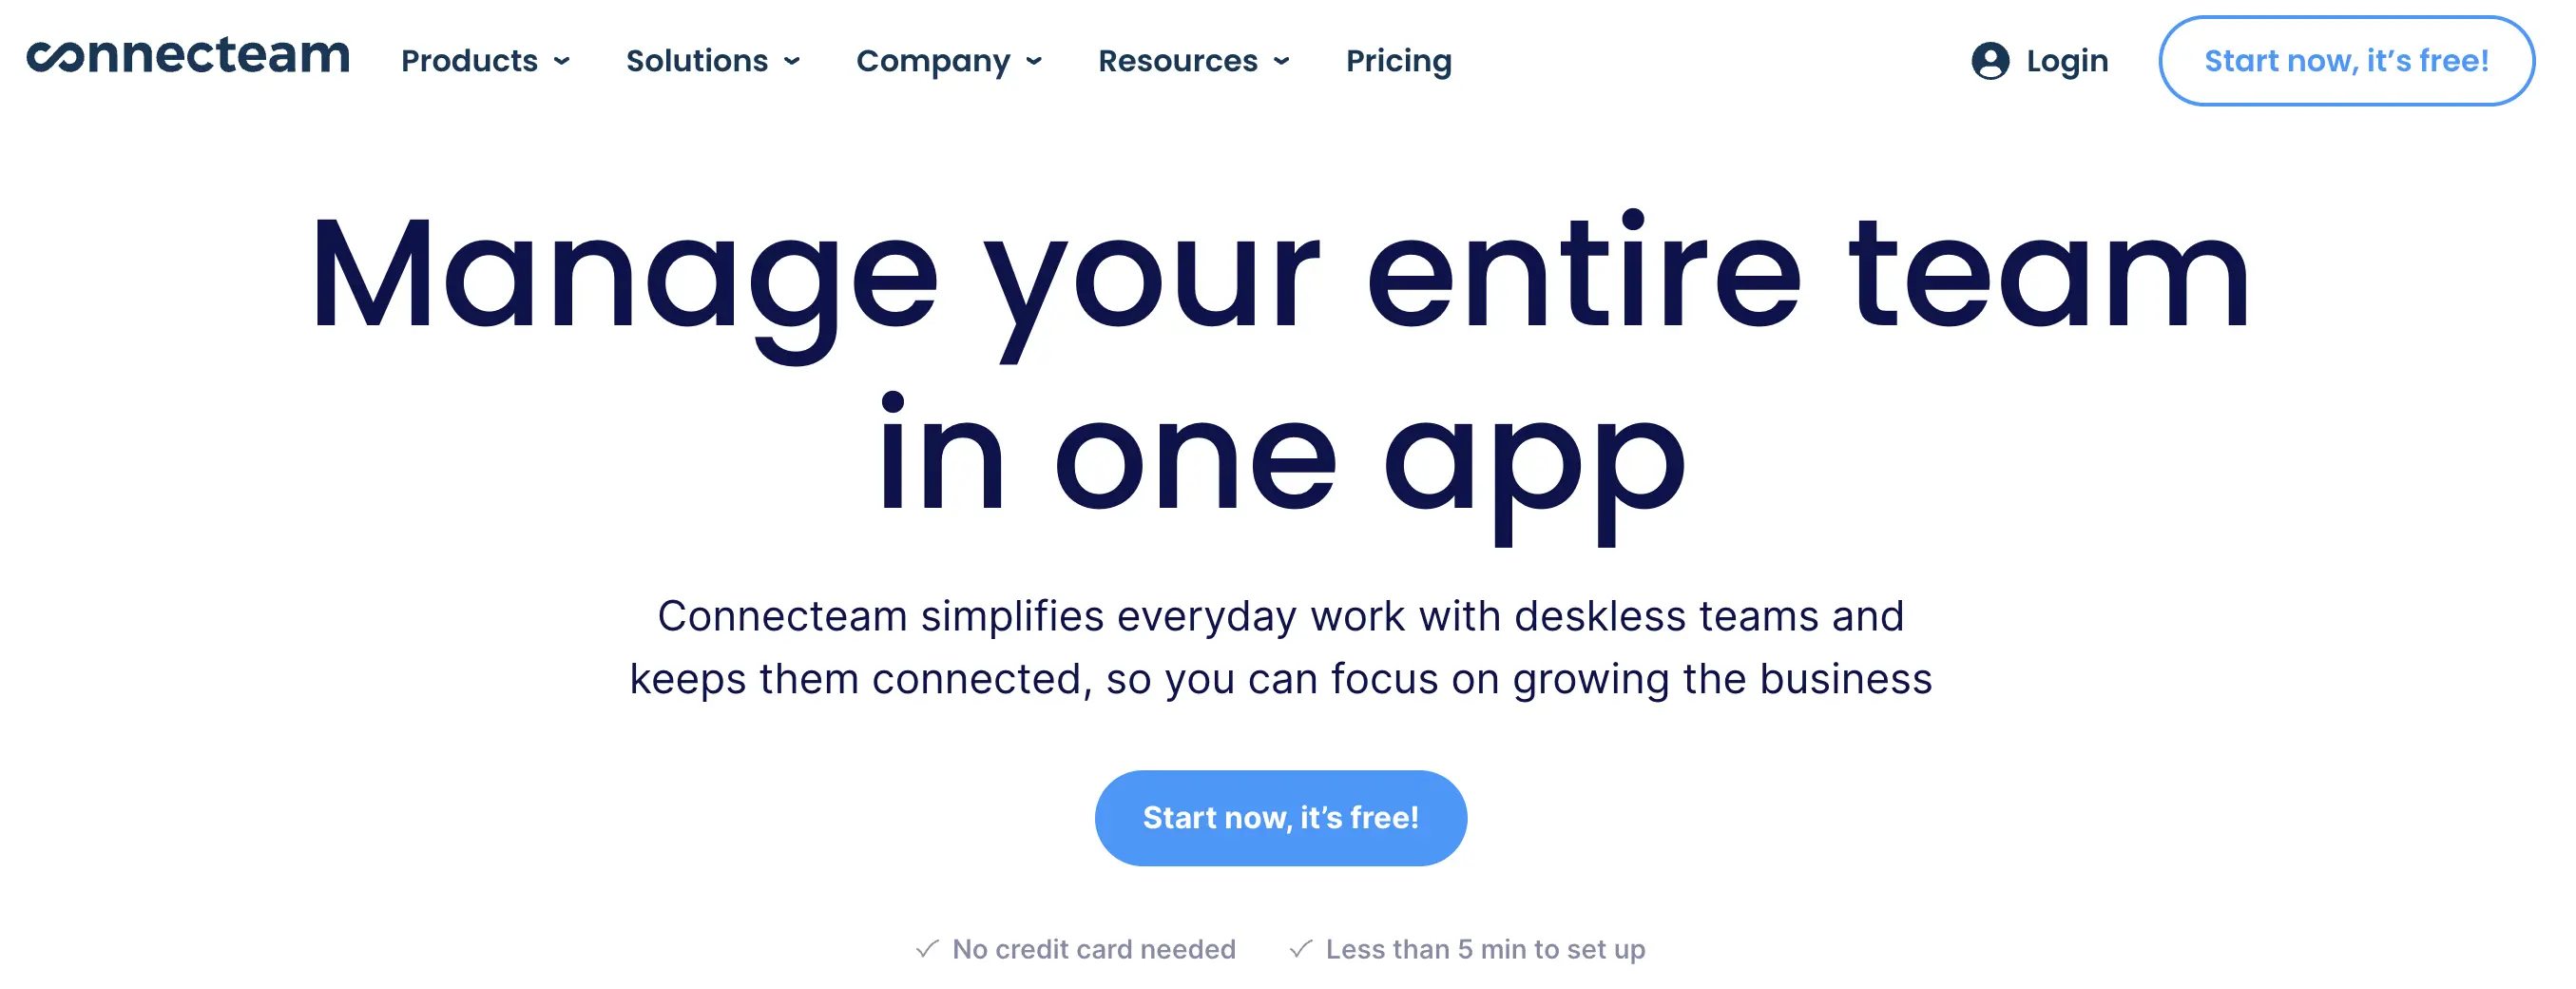 connecteam homepage